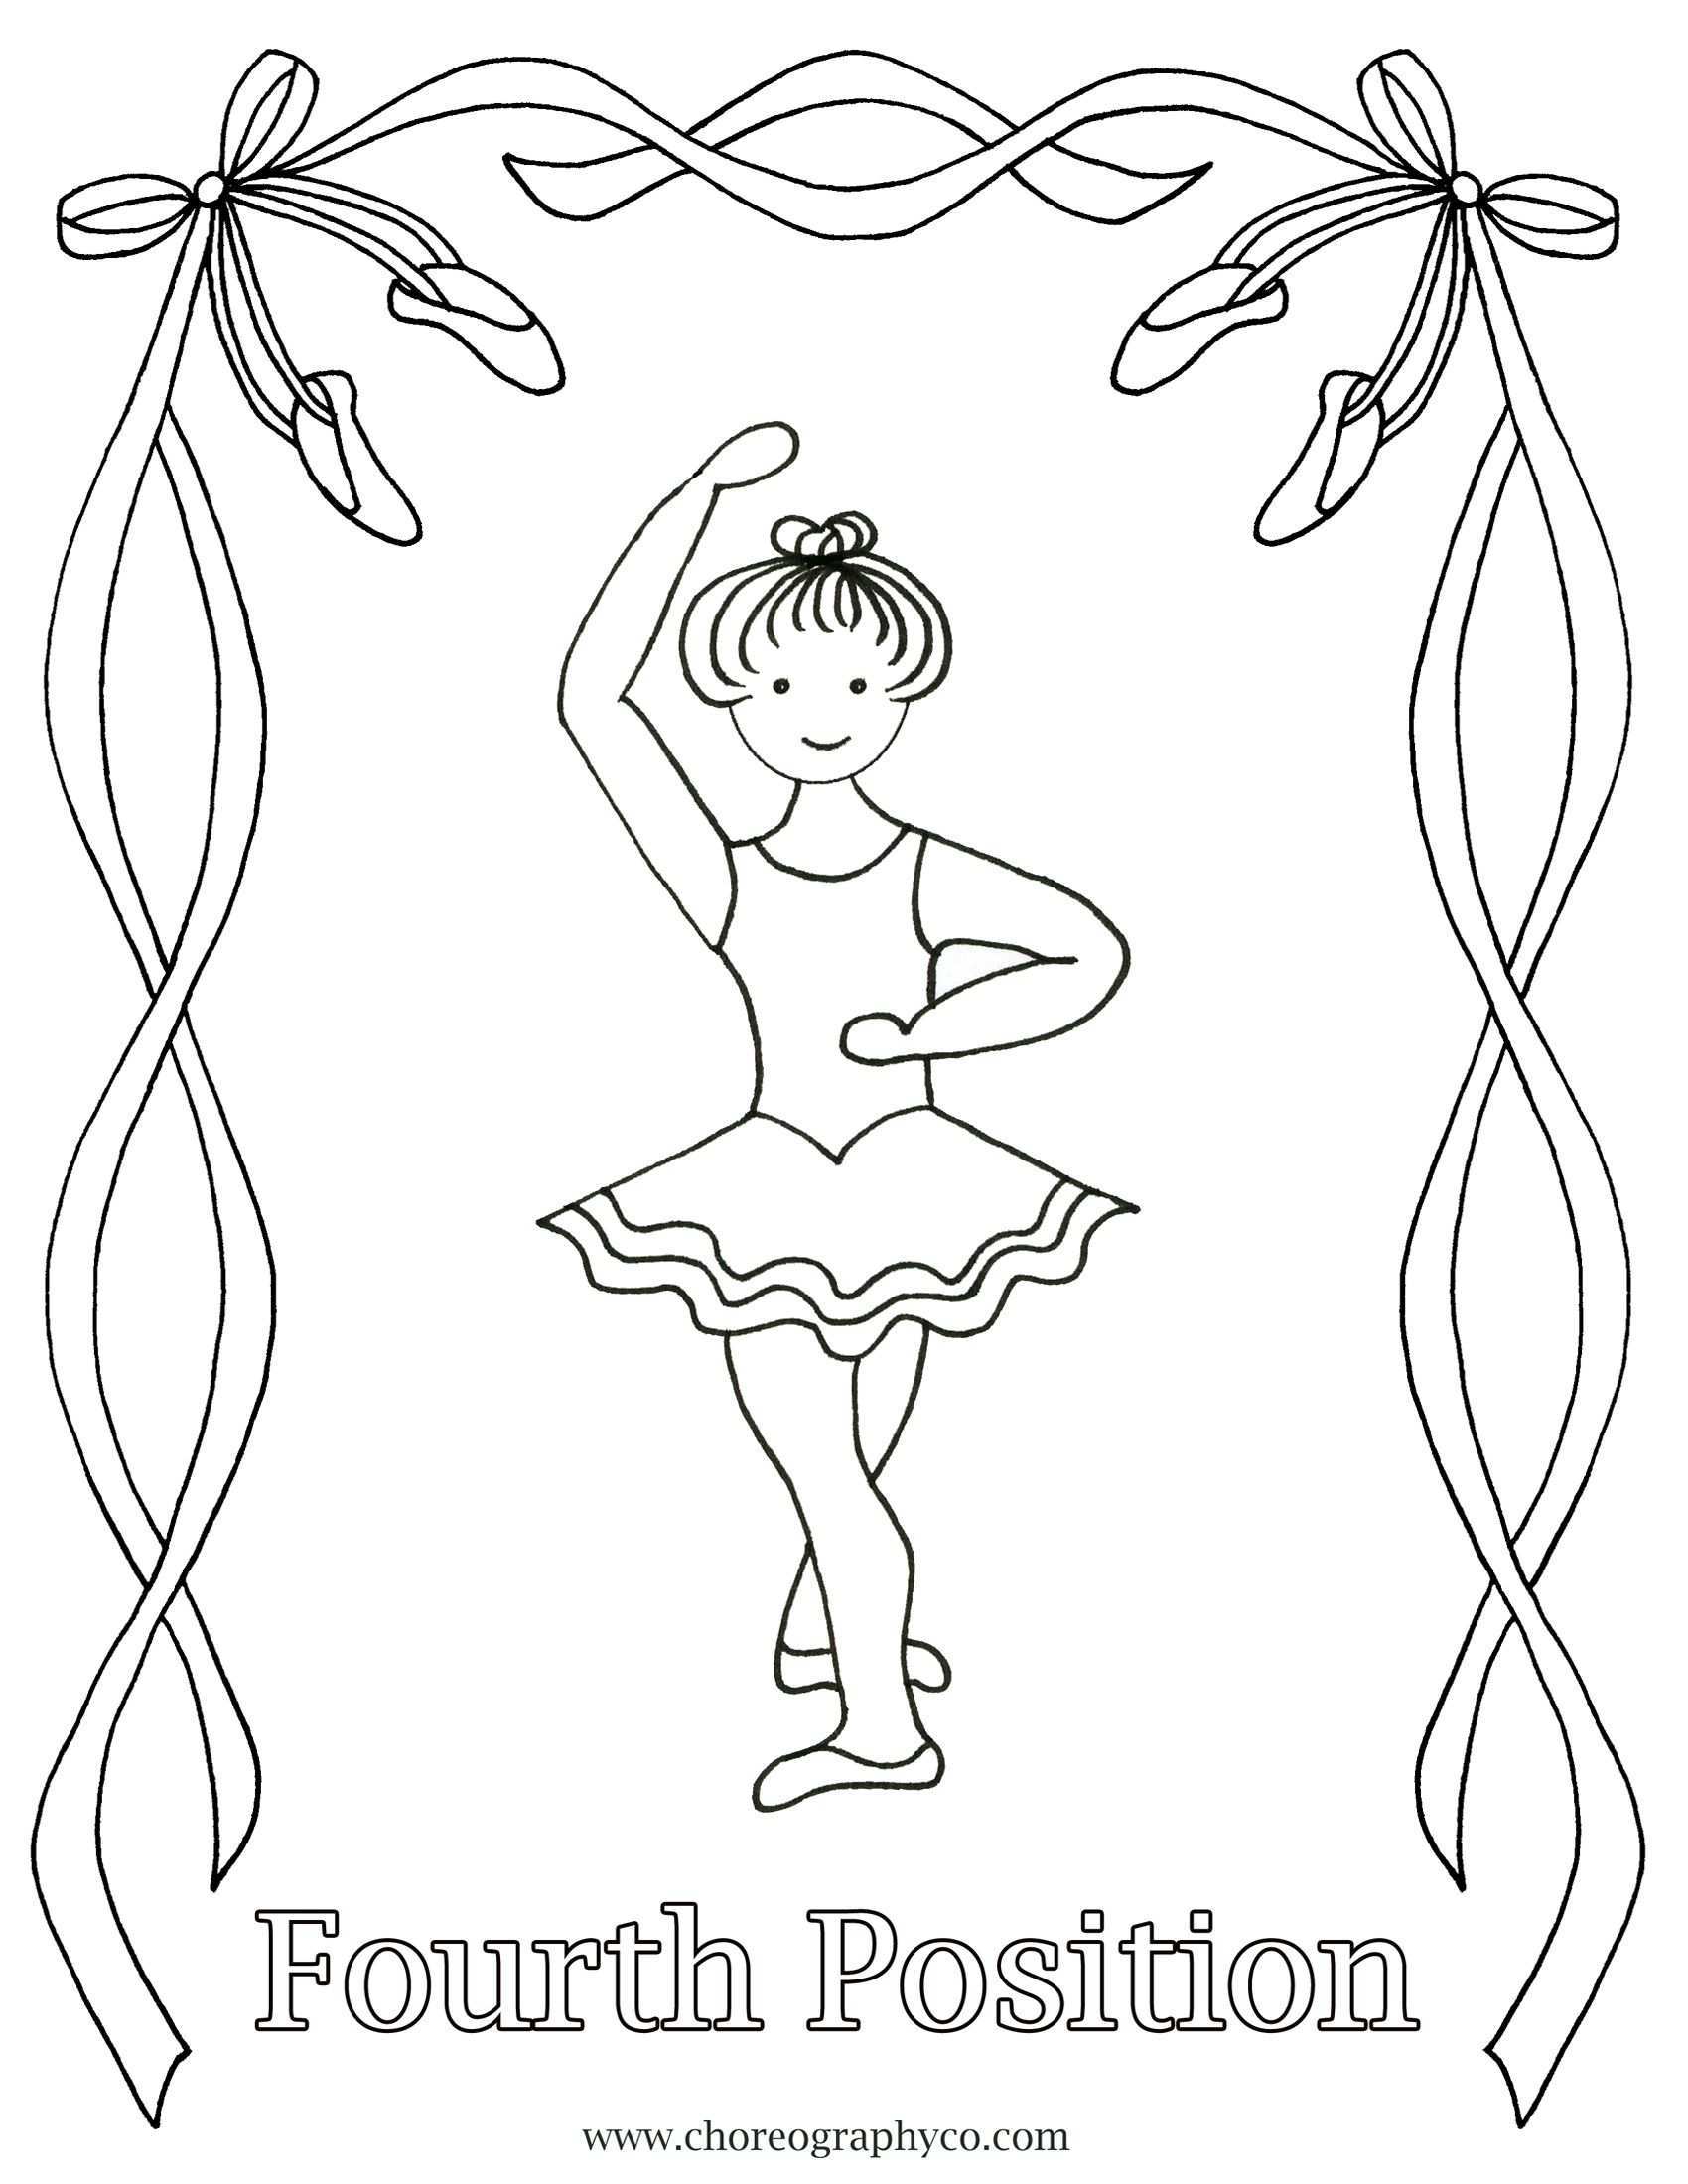 Pin By Sabina Britt On Ballet Quilt Ideas Ballerina Coloring Pages Dance Coloring Pag